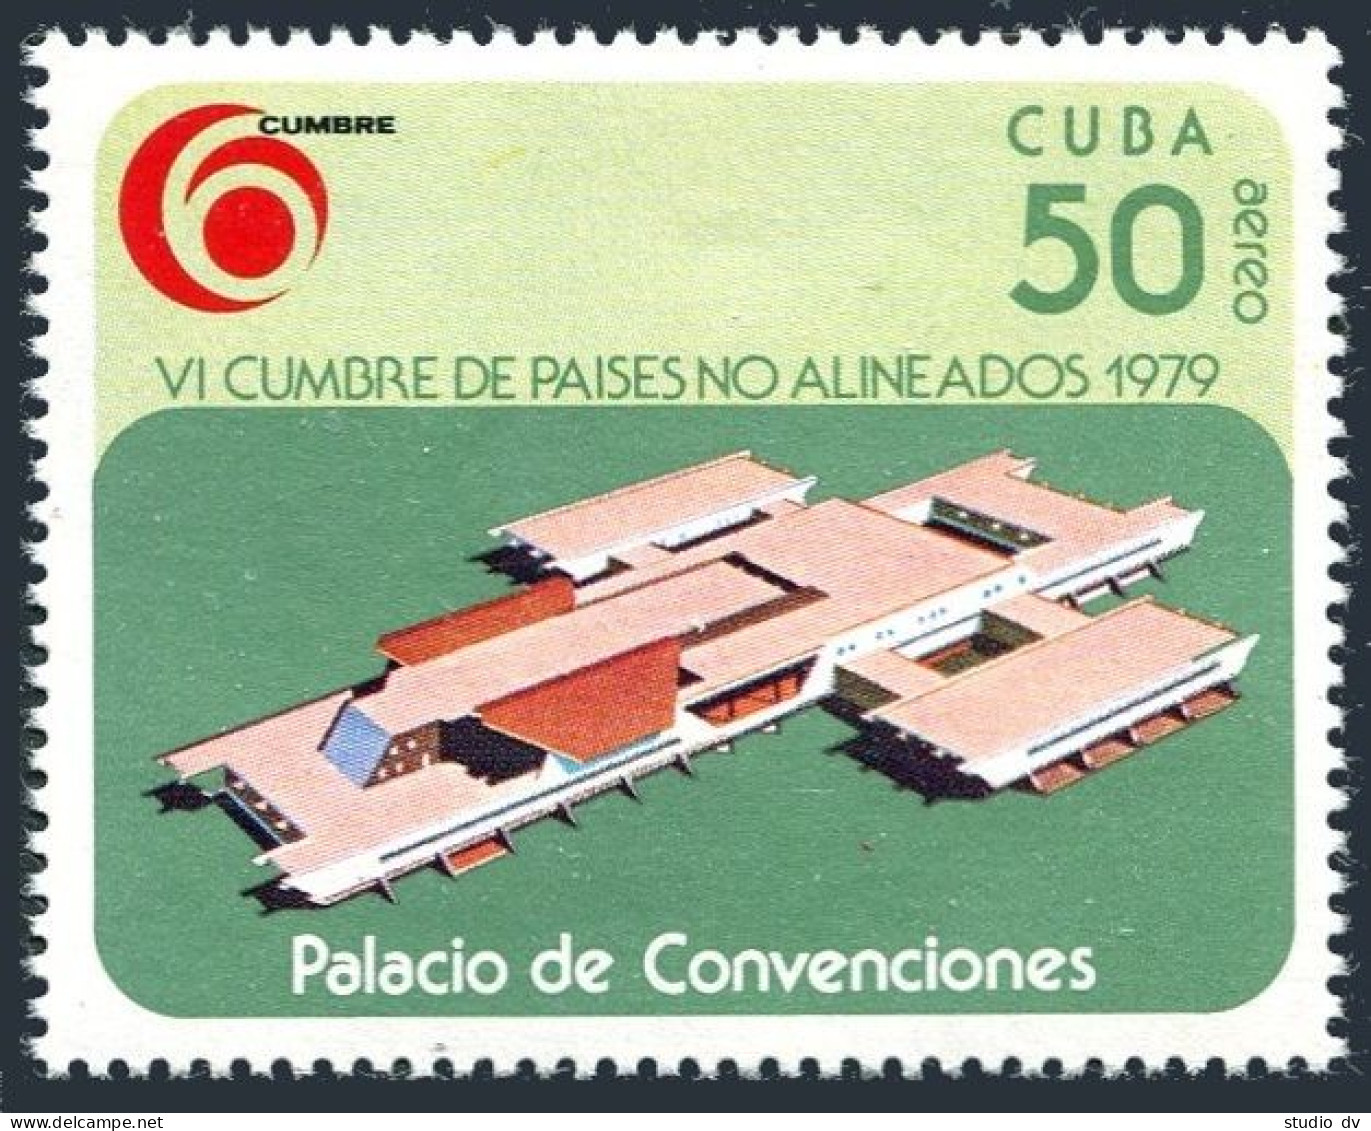 Cuba C320, MNH. Michel 2428. Conference Of Nonaligned Countries, 1979. Palace. - Neufs